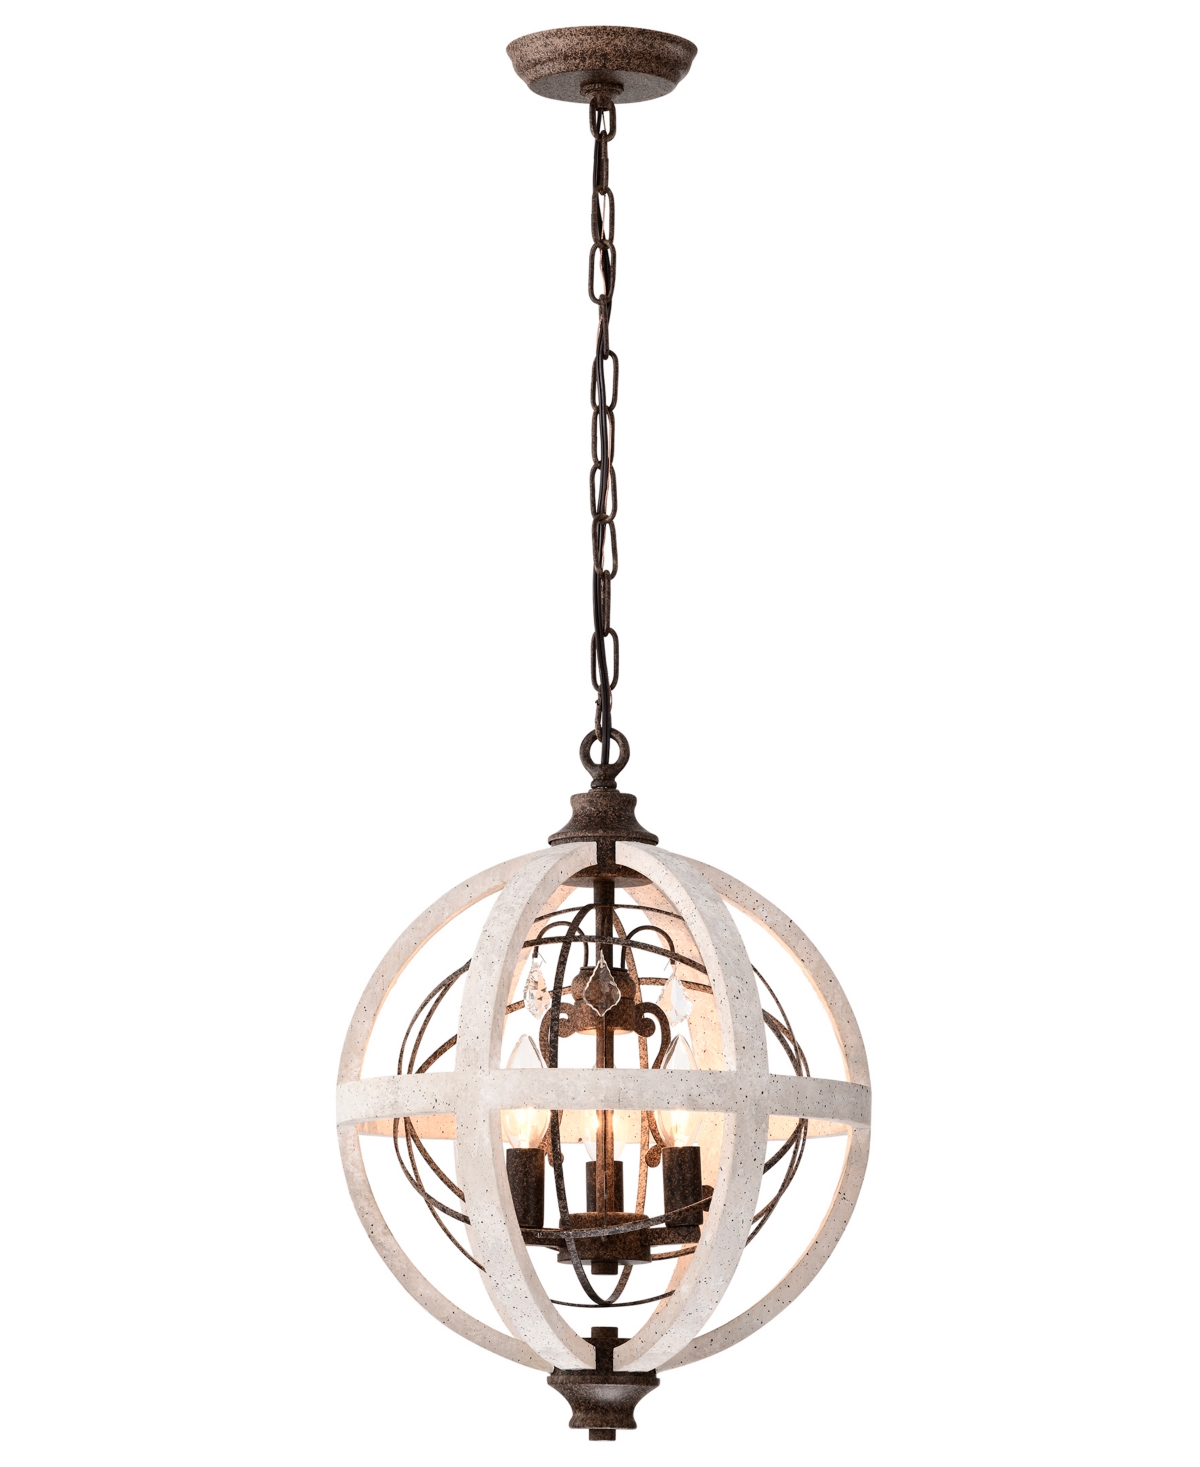 Home Accessories Reenie 14" Indoor Finish Chandelier With Light Kit In Rustic Brown And Weathered White